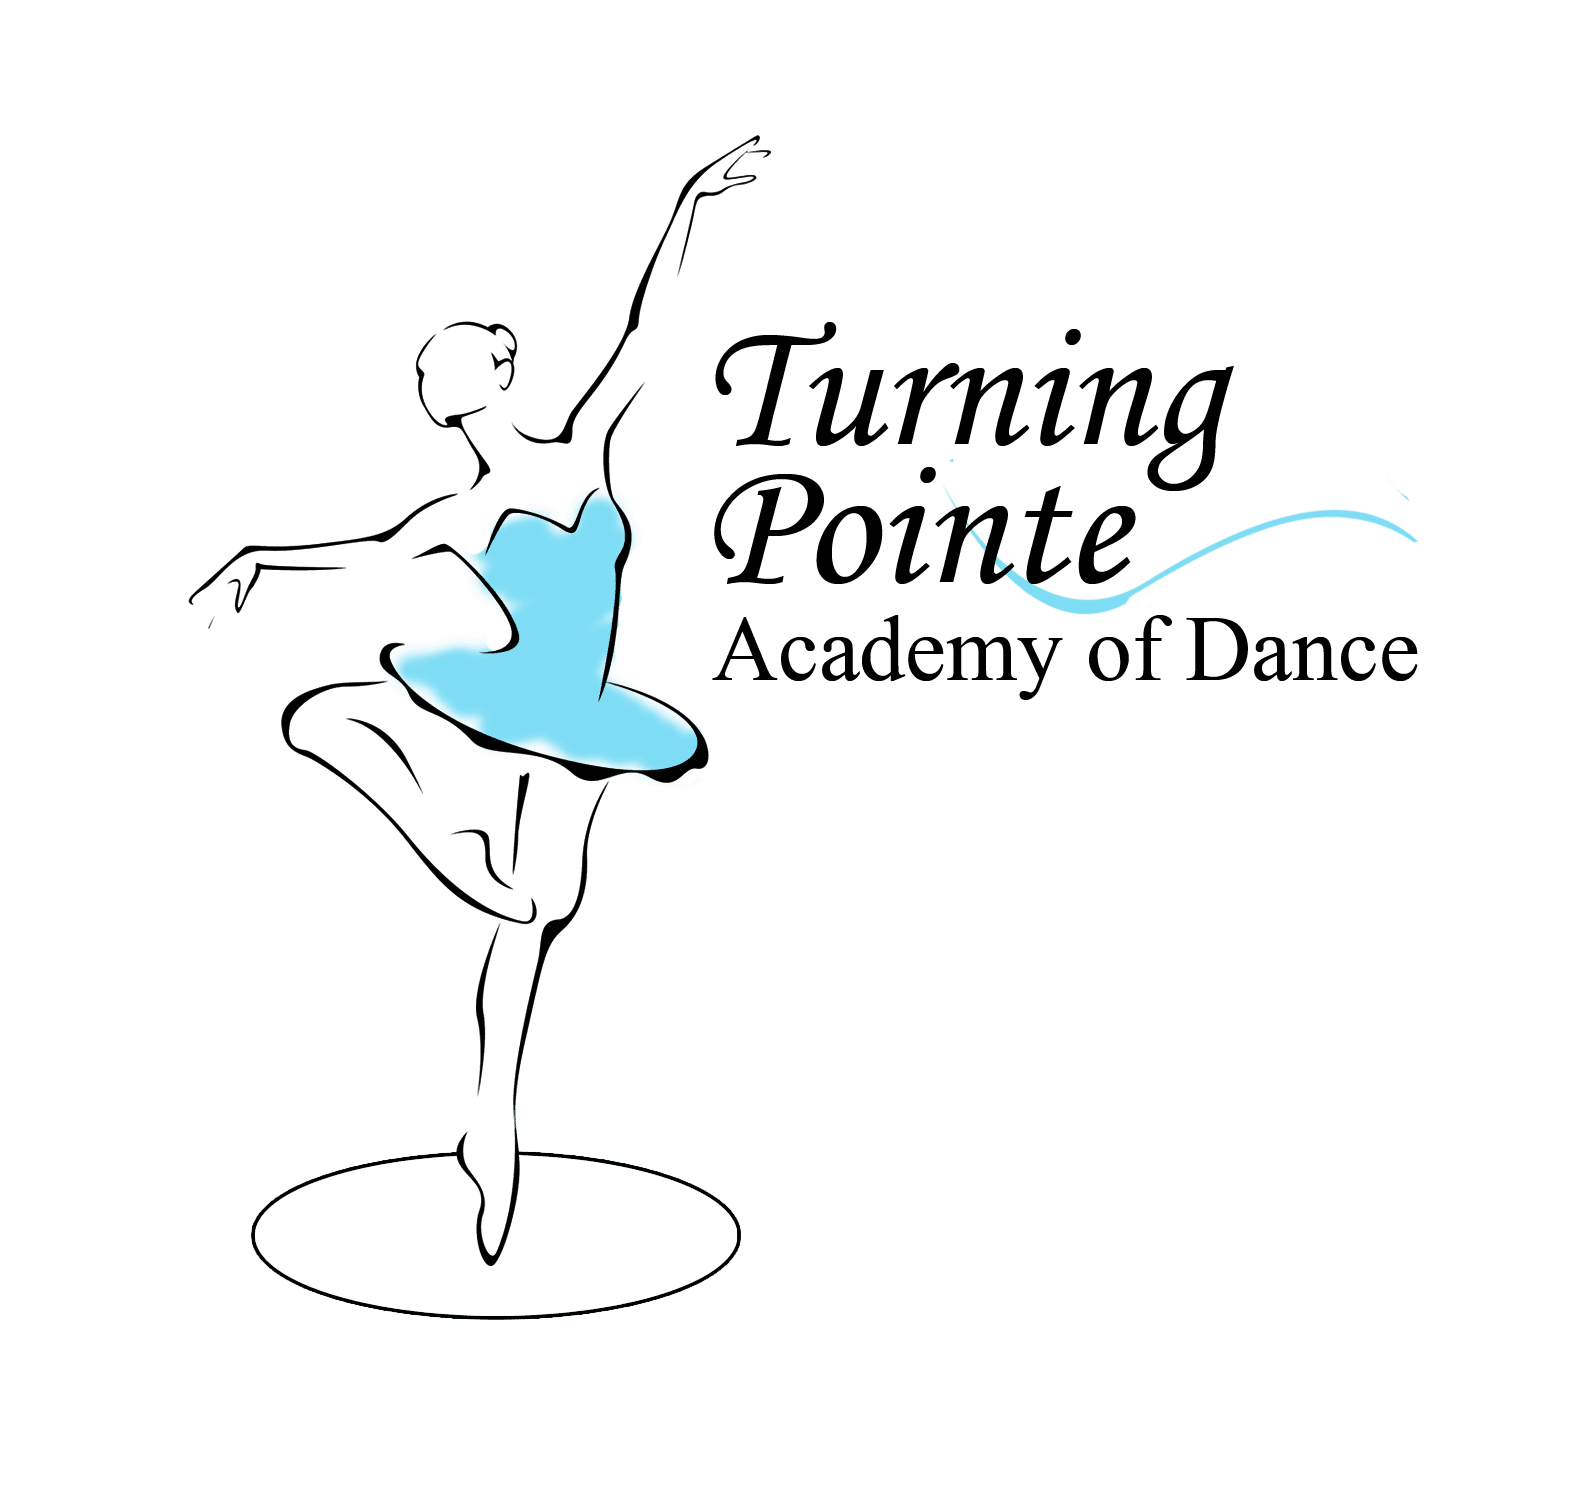 Turning Pointe Academy of Dance